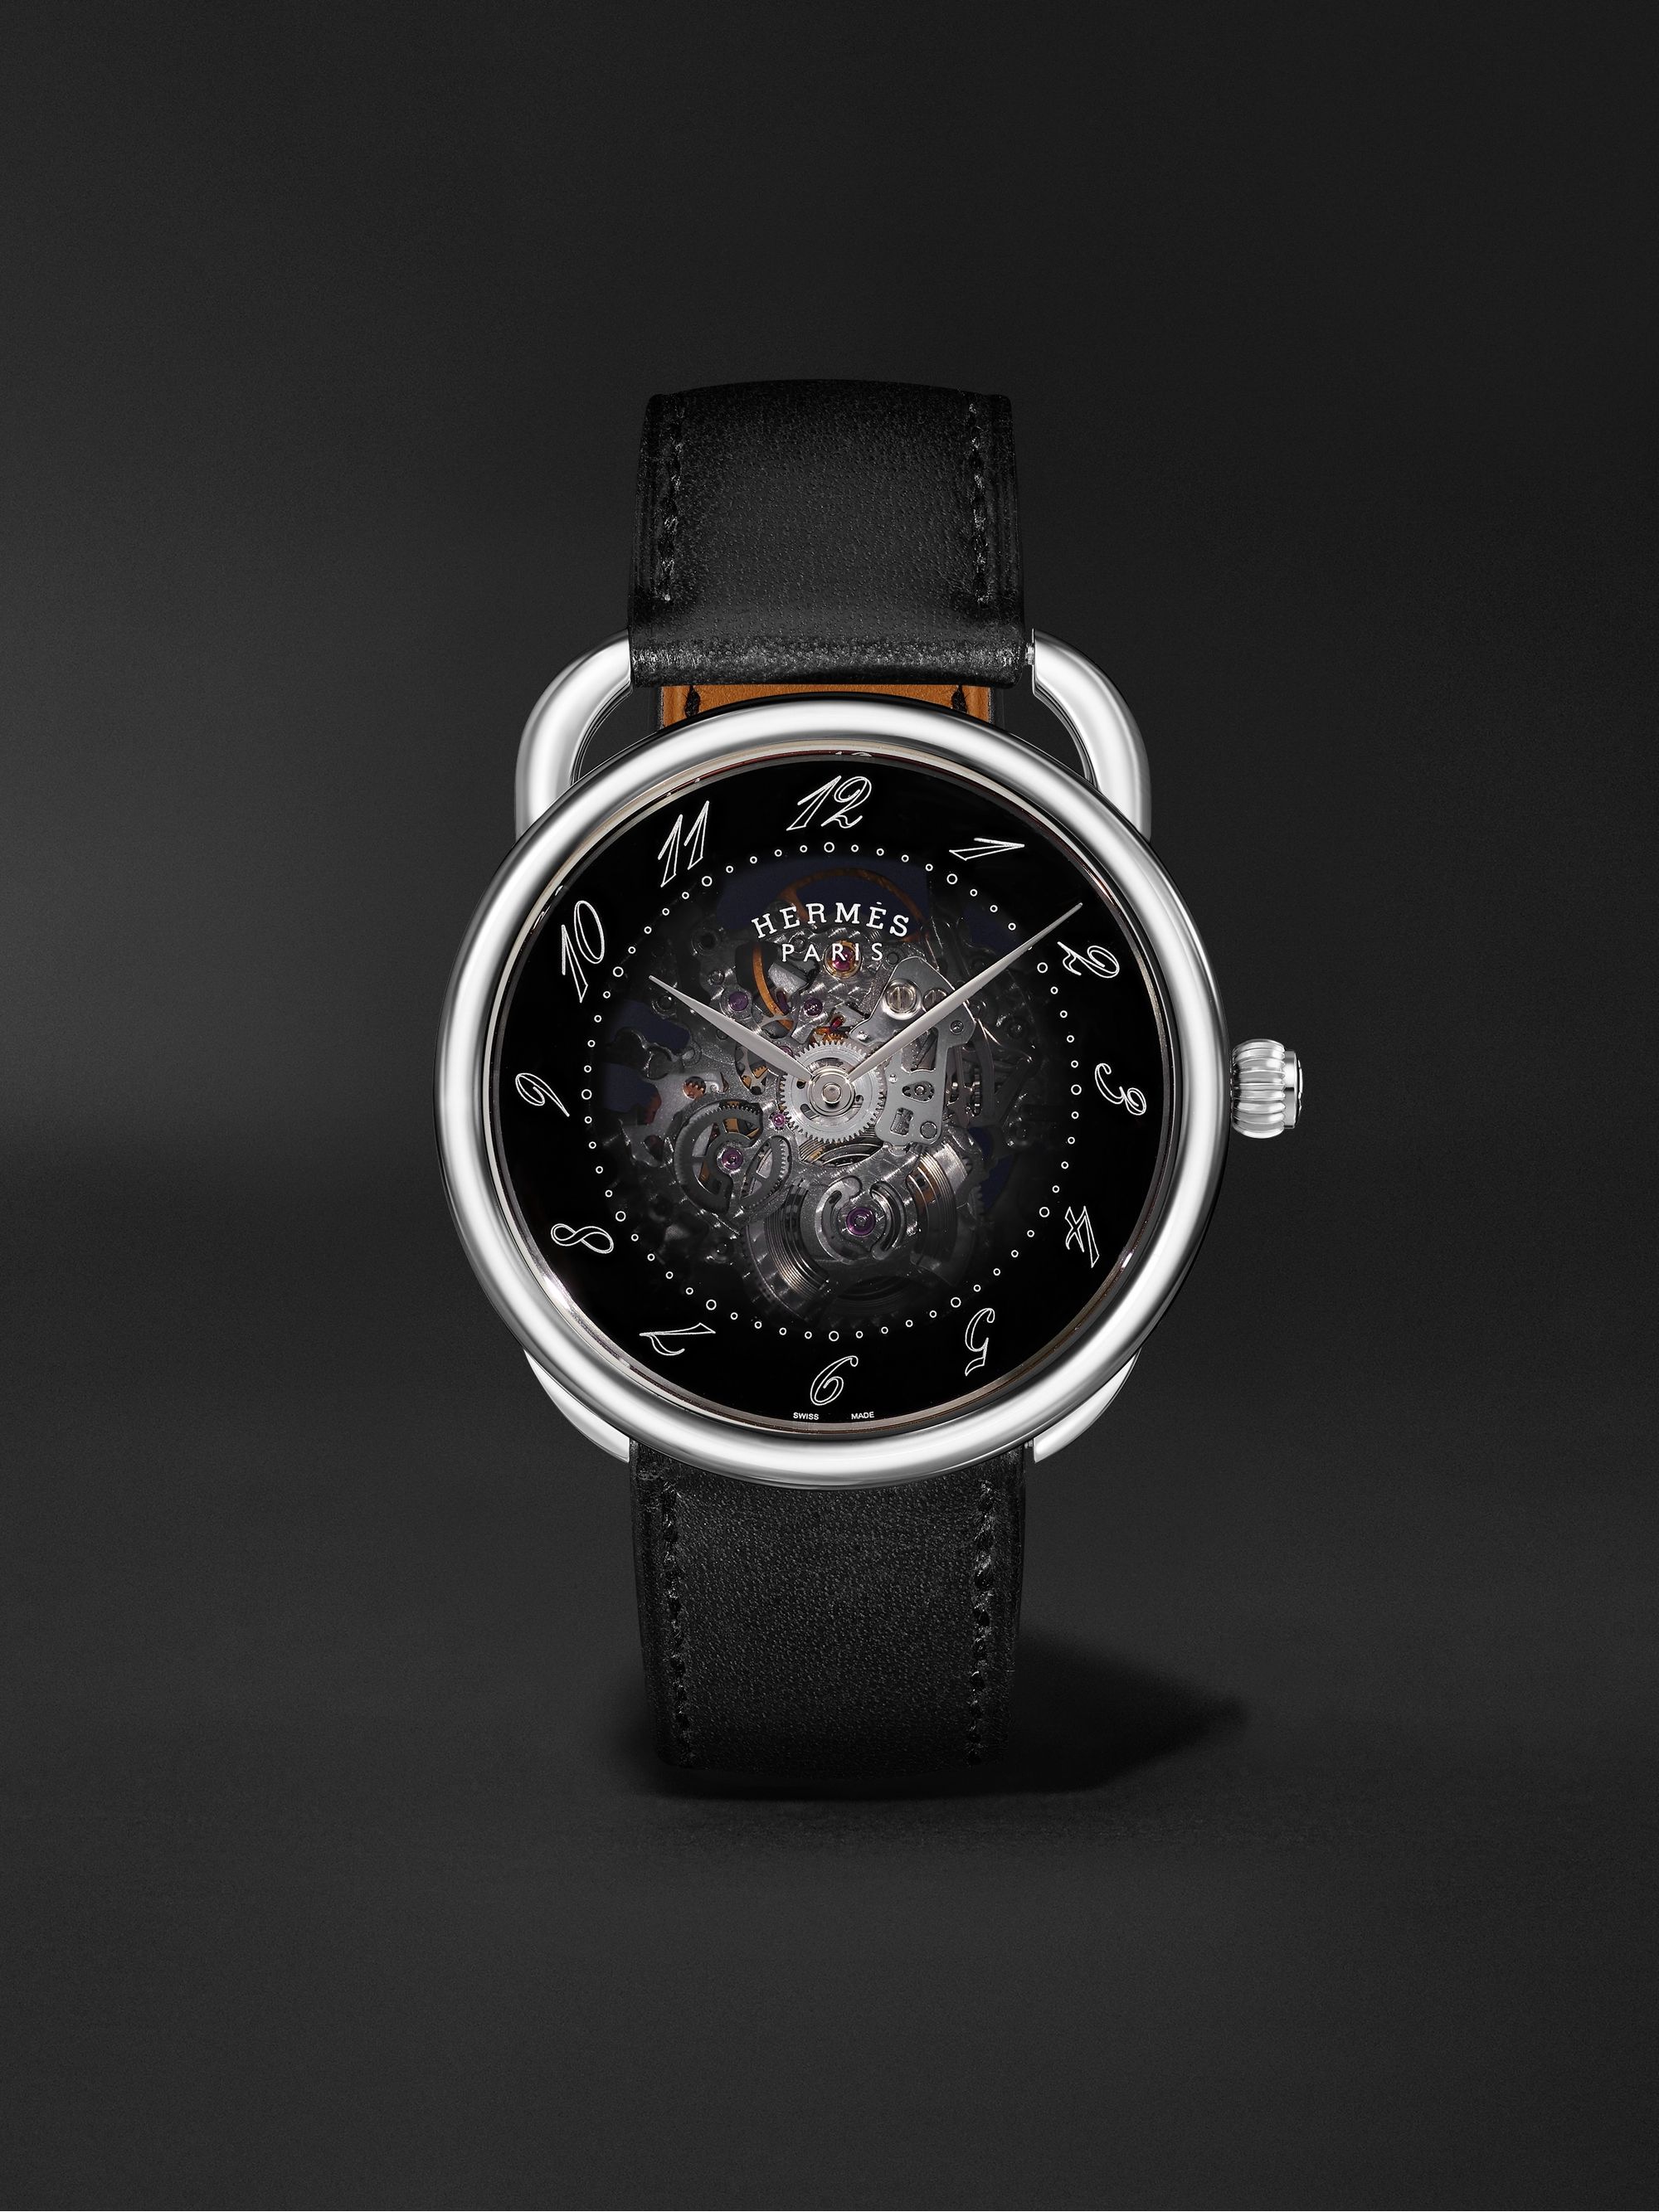 HERMÈS TIMEPIECES Arceau Squelette Automatic 40mm Stainless Steel and  Leather Watch, Ref. No. W055631WW00 | MR PORTER